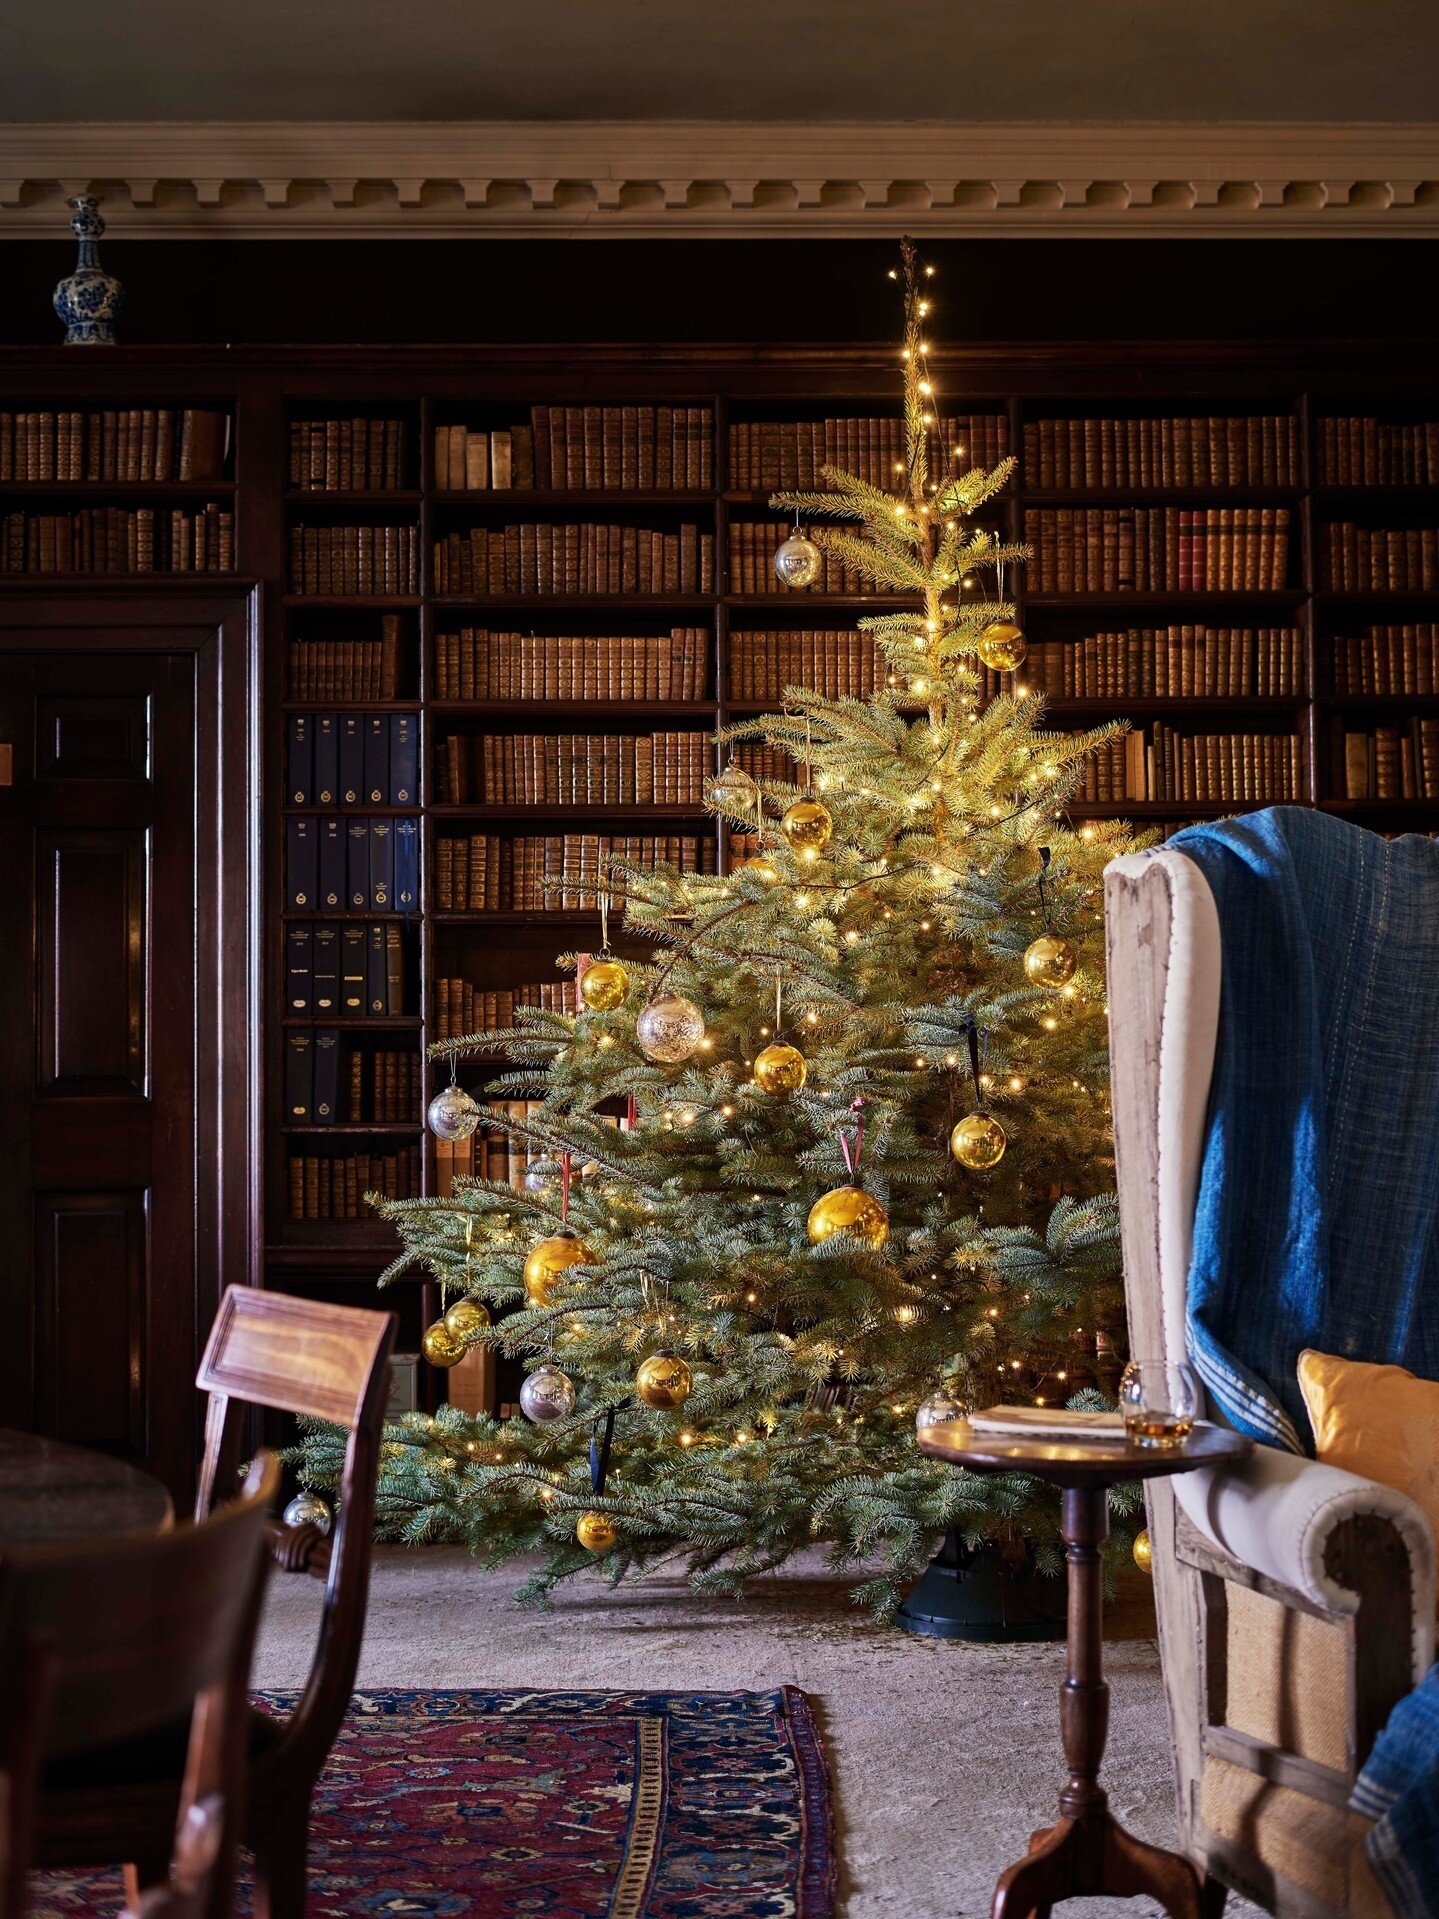 Enjoy a stately home experience this festive season.

From a unique, romantic country cottage for two, to the splendour of hiring Wolterton Hall's 11 bedrooms, Christmas will be truly memorable at Wolterton Park.

Think cosy fires, woodland and parkl